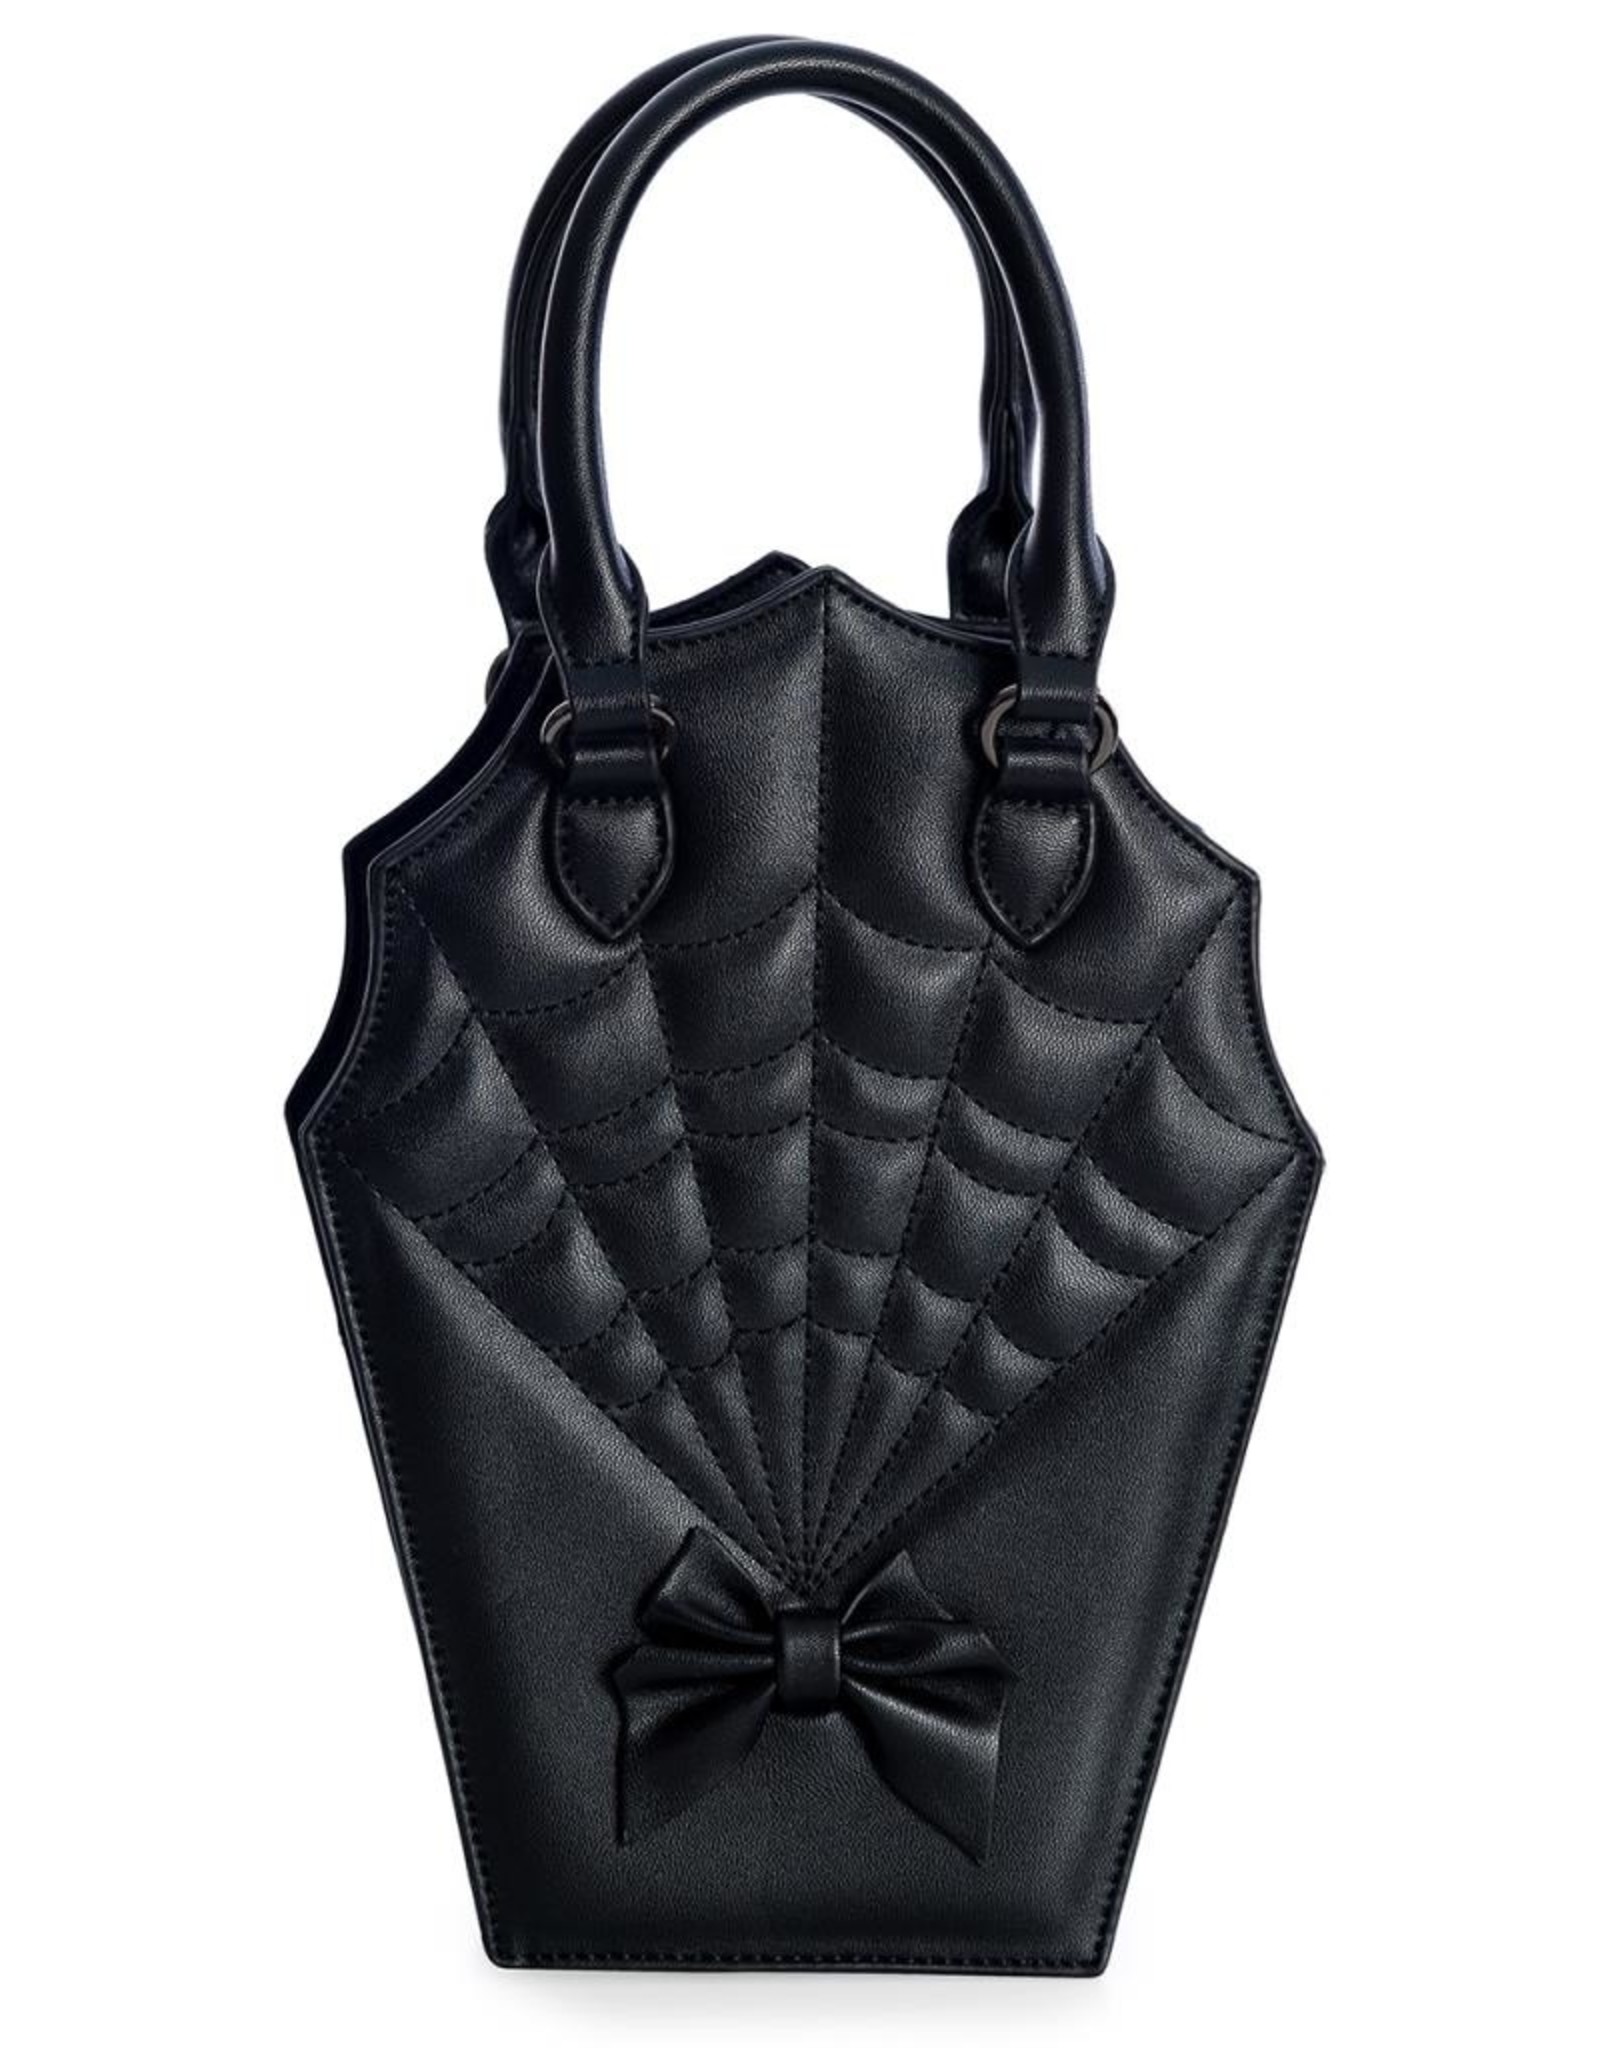 Banned Gothic bags Steampunk bags - Ghoul Handbag Coffin with Spiderweb